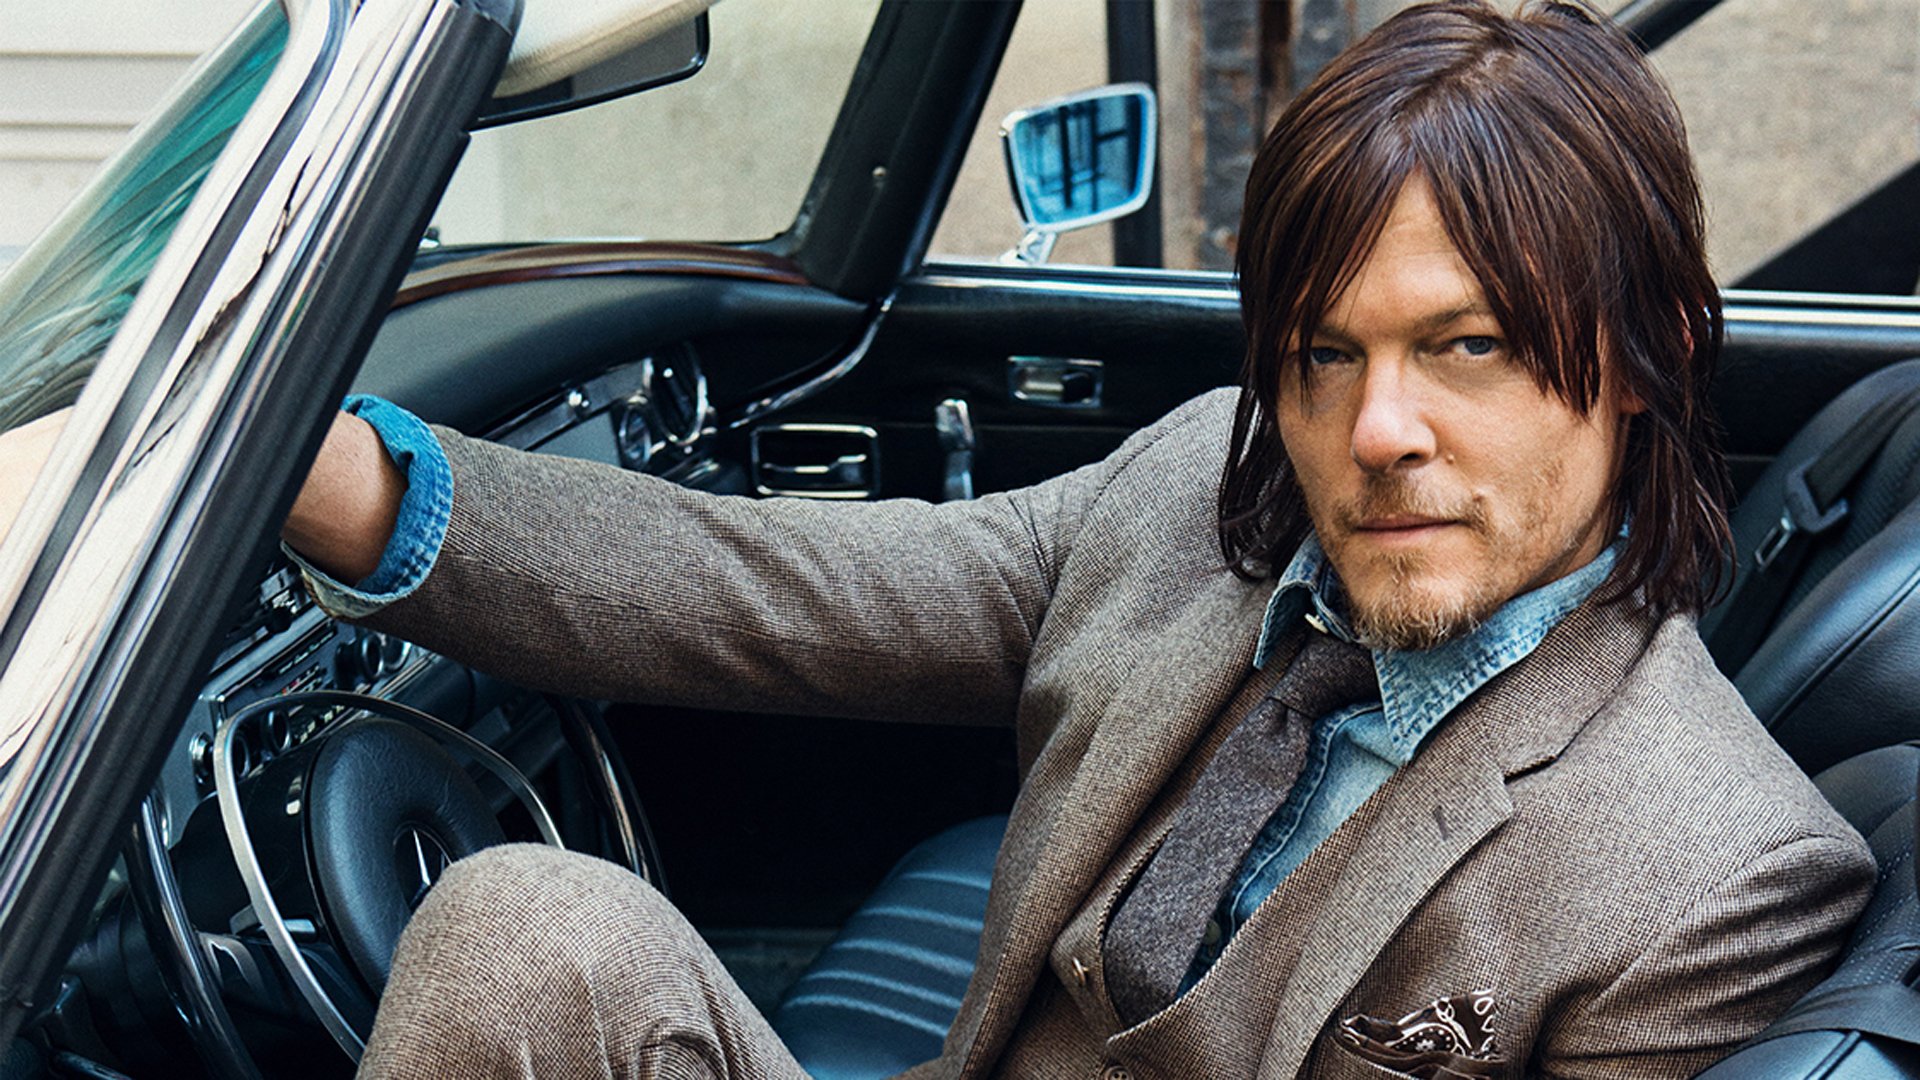 NORMAN REEDUS WALLPAPERS FREE Wallpapers Background images